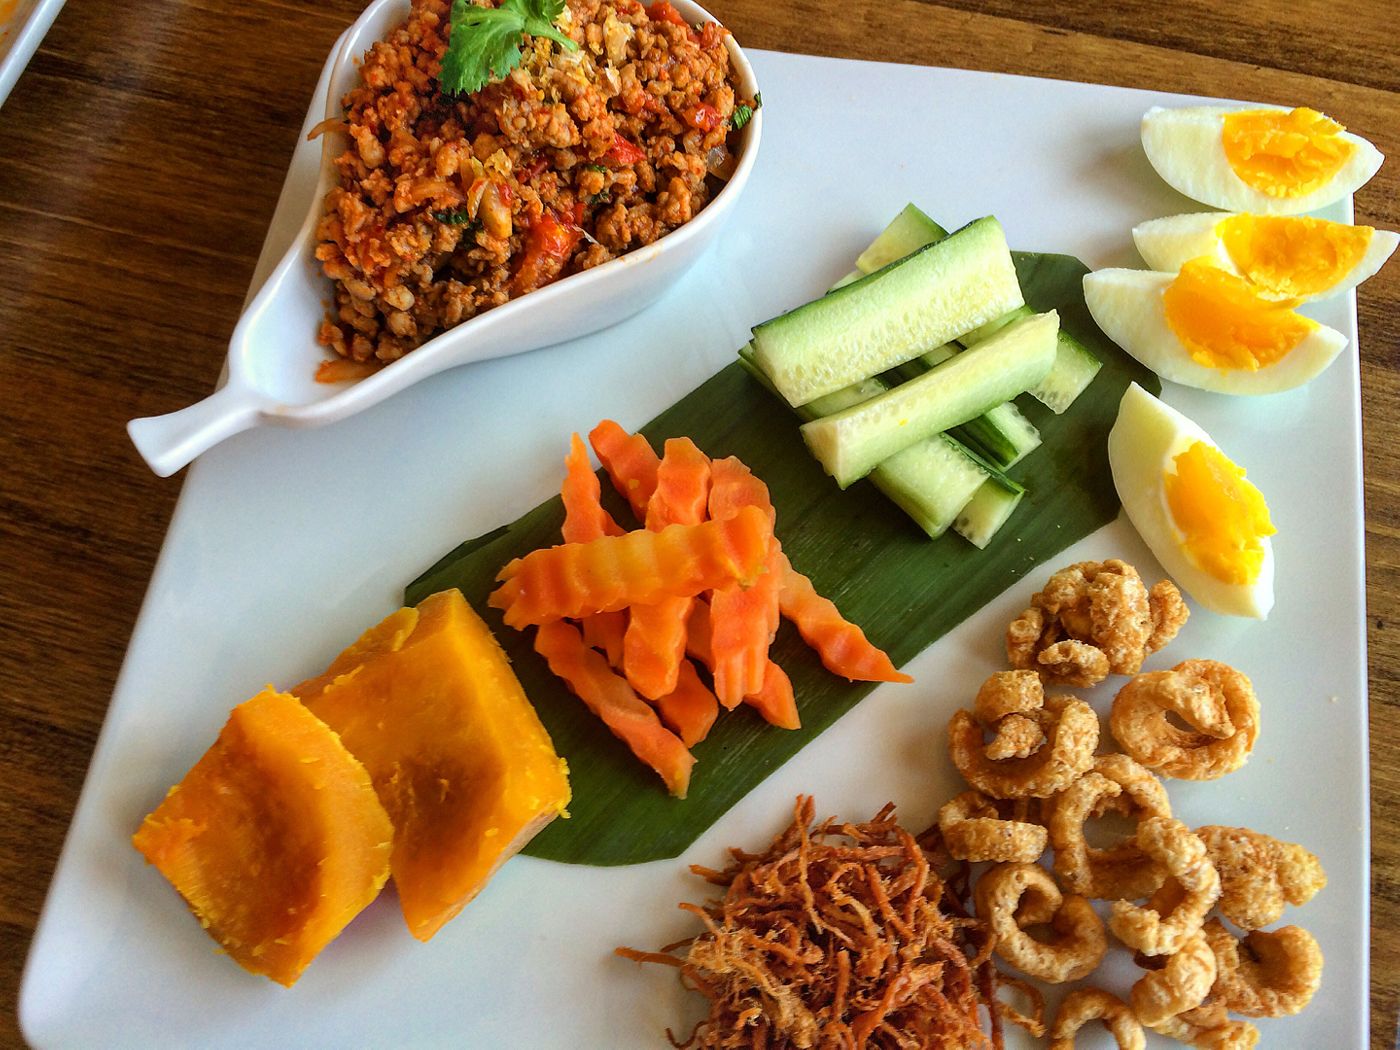 The best local dishes you must try in Chiang Mai, Thailand